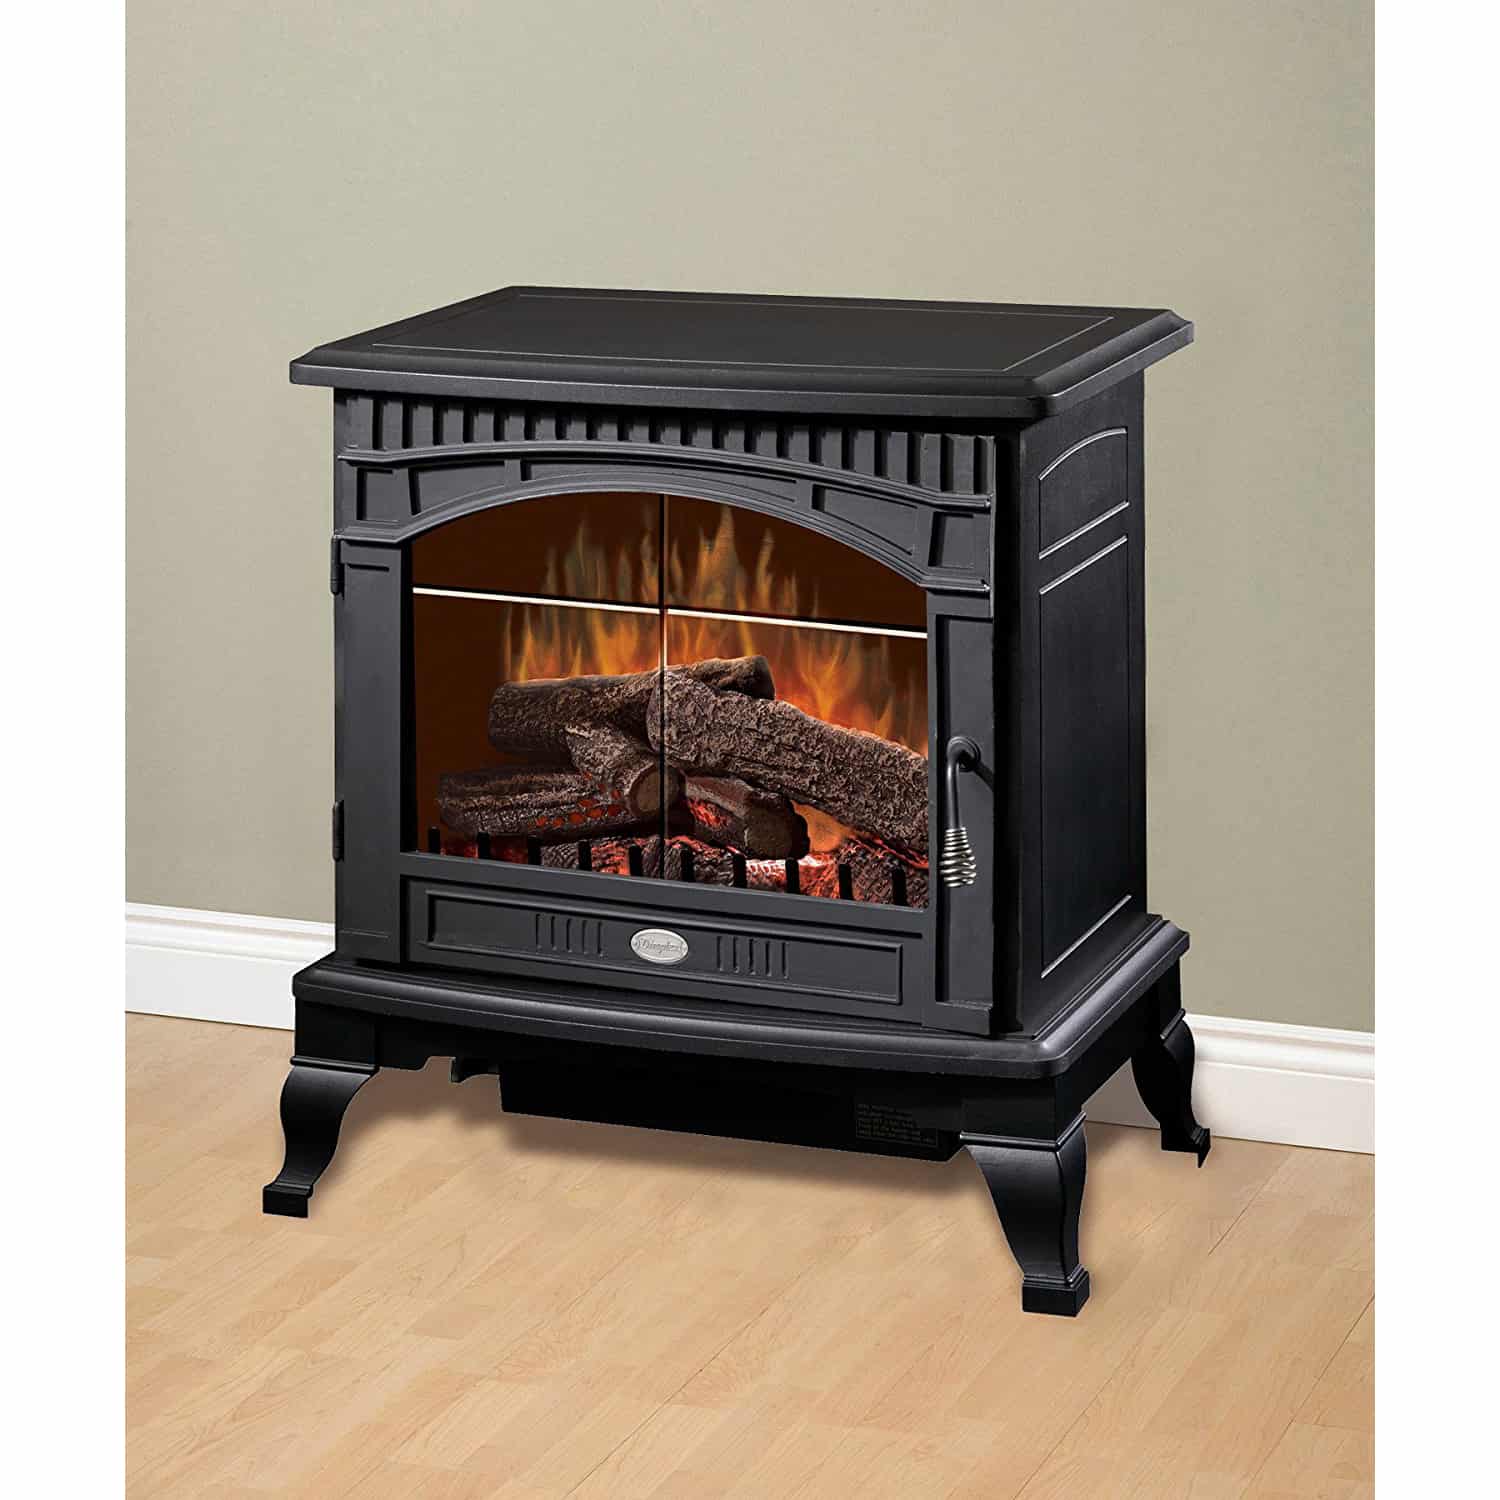 Dimplex 25" Traditional Electric Stove with Bevelled Glass Detailing